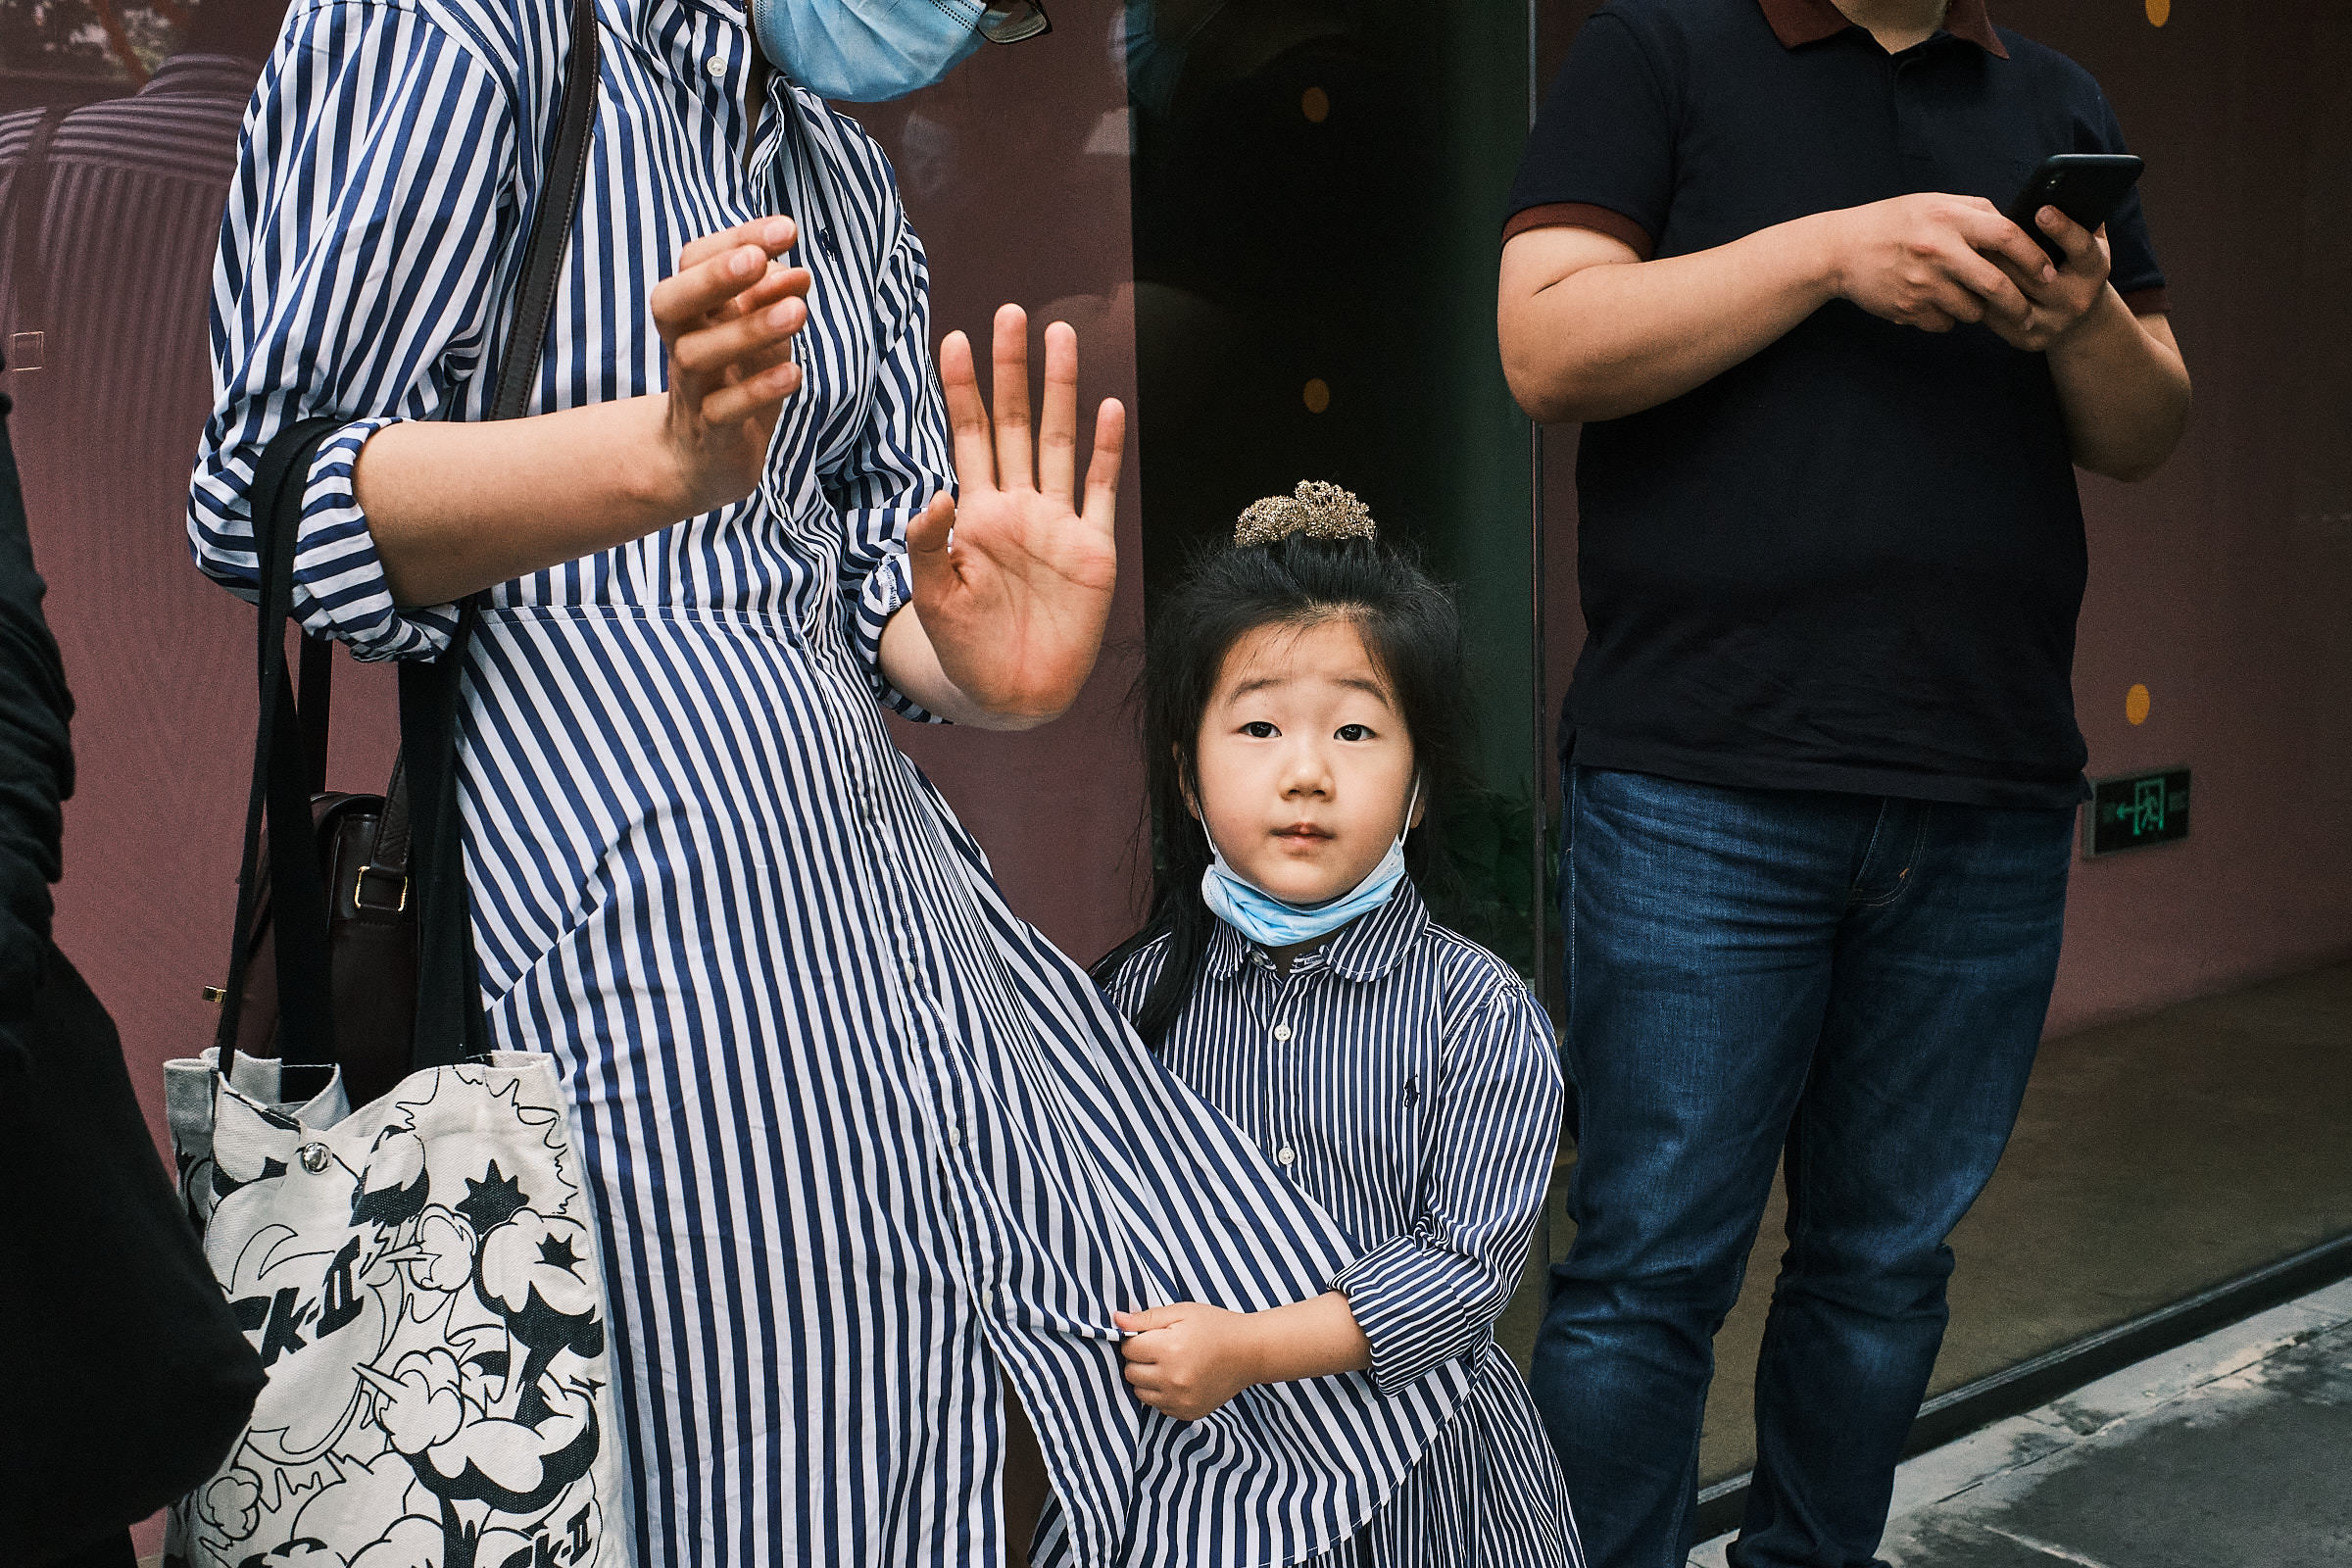 Little Girl Looks At Camera While Her Moms Does Hand Gesture At Wedding In Shanghai